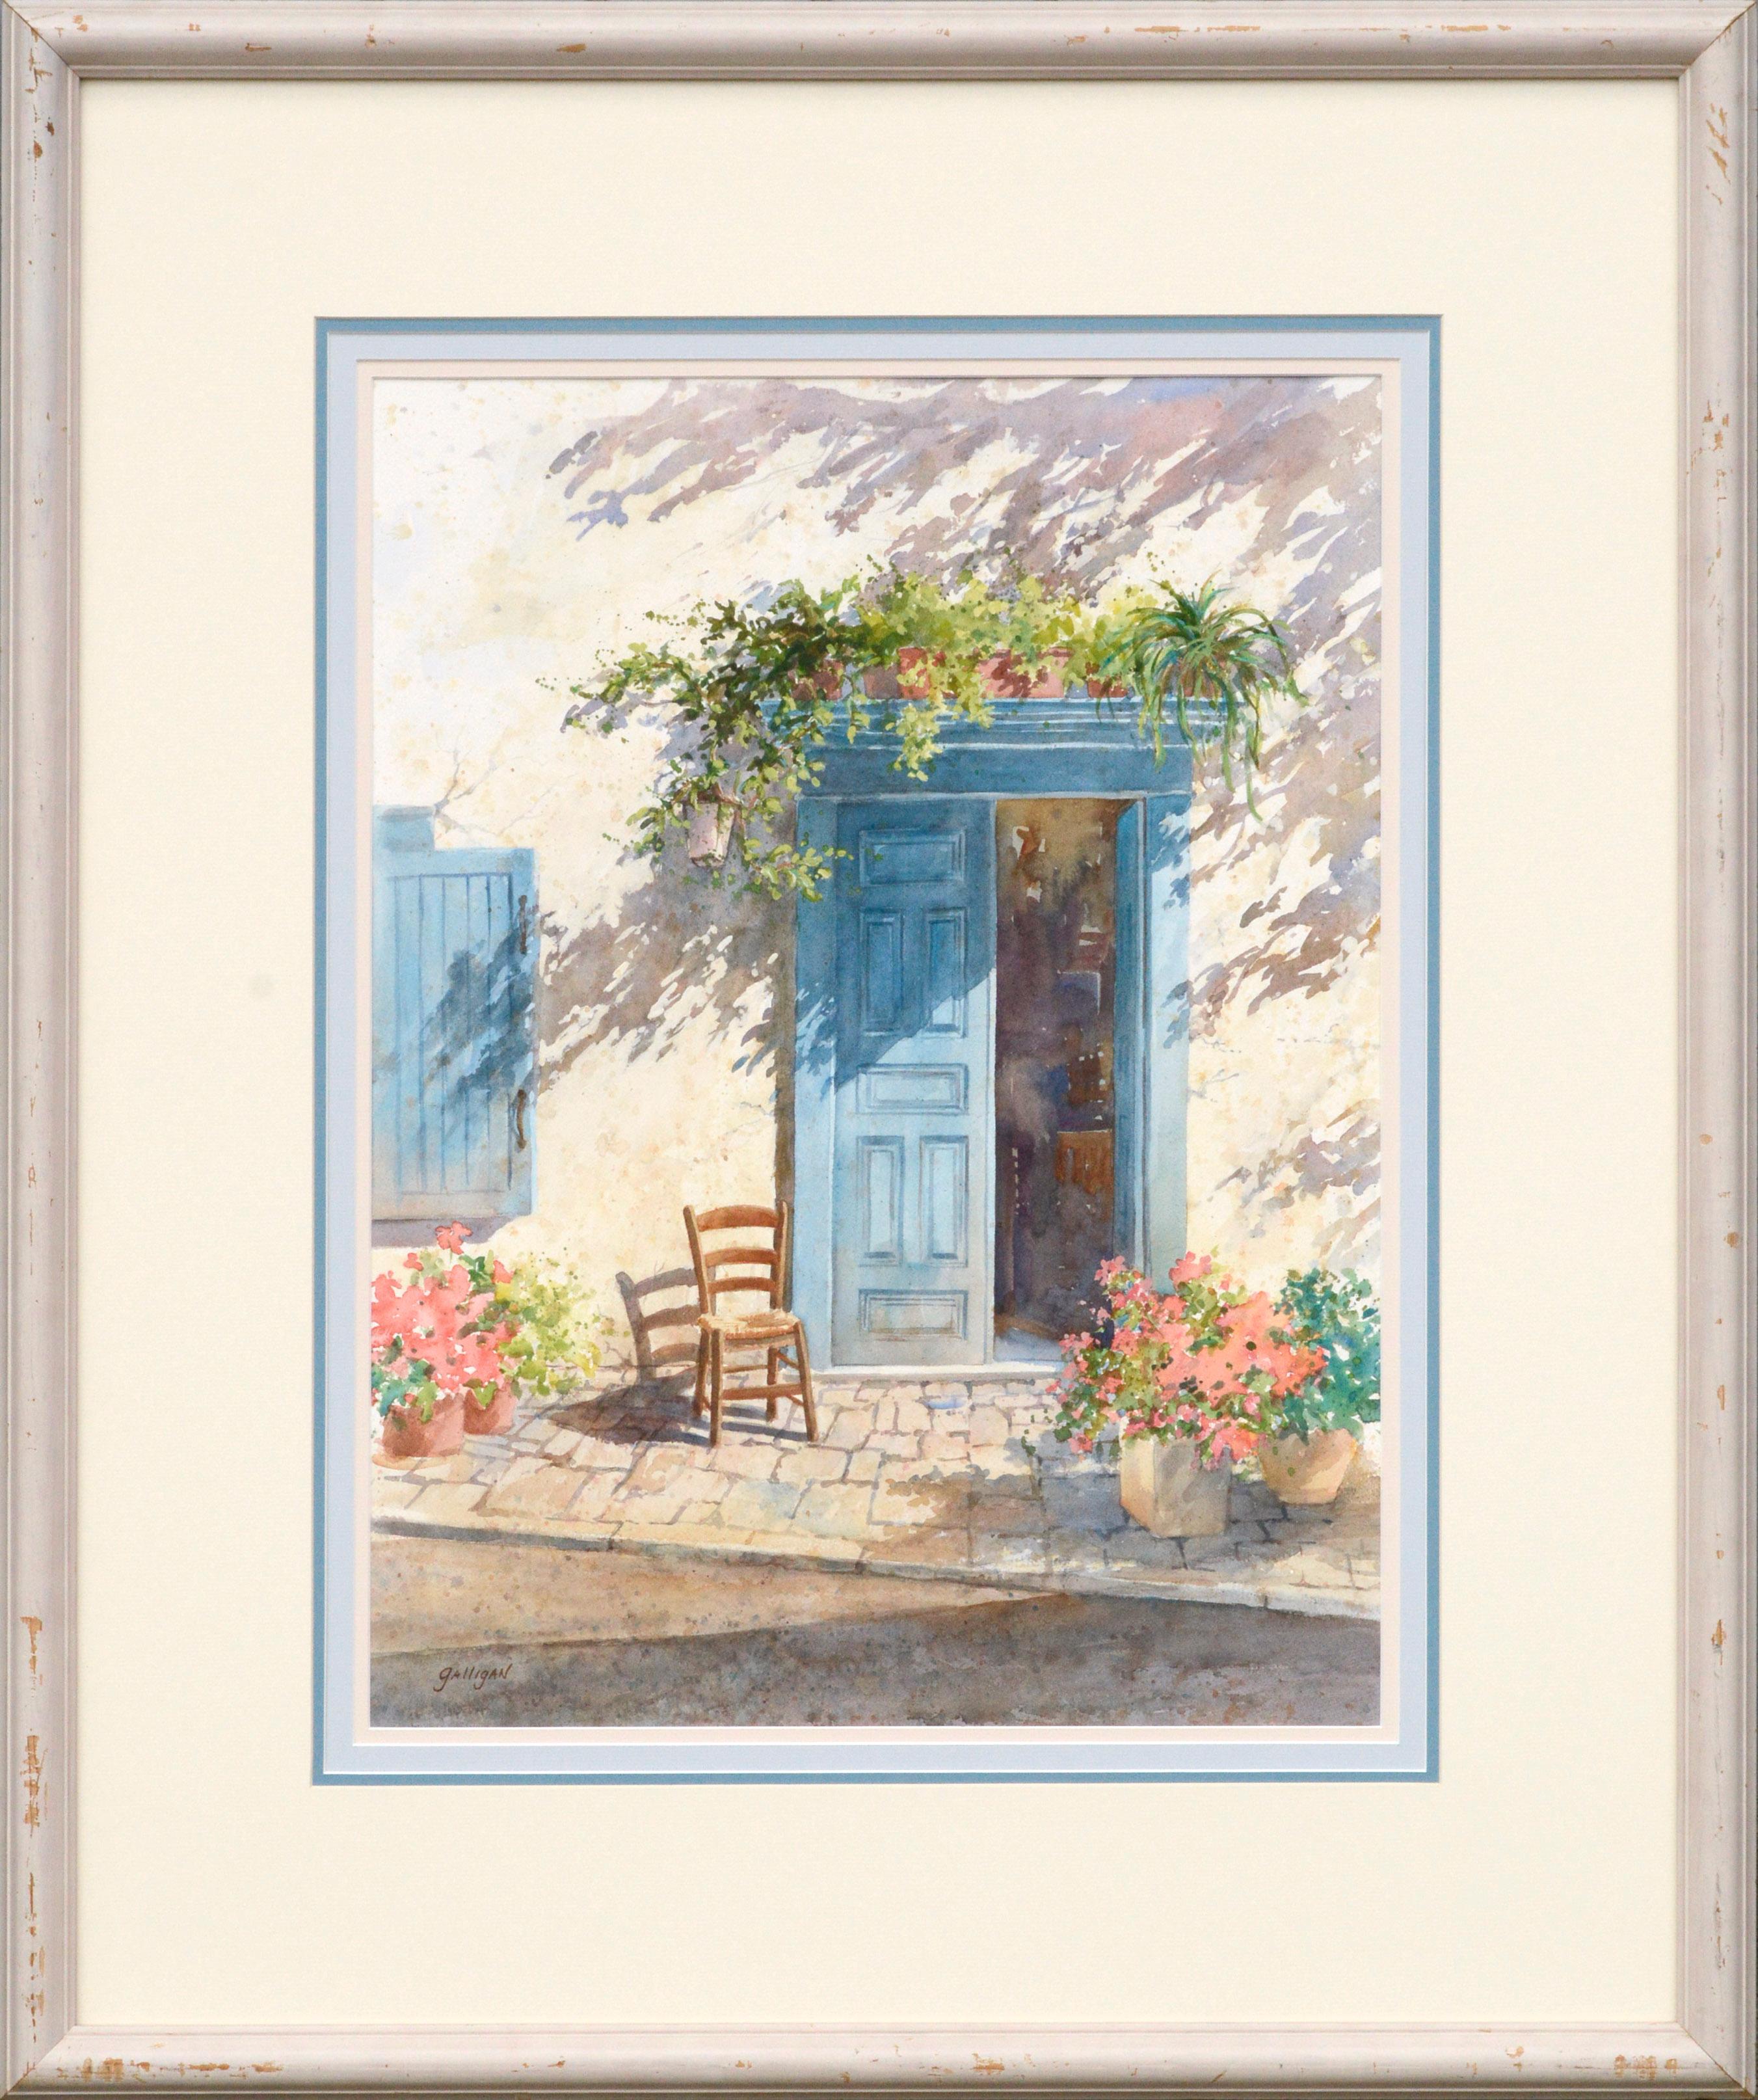 Sharon Galligan Landscape Art - Blue Doorway with Chair and Flowers